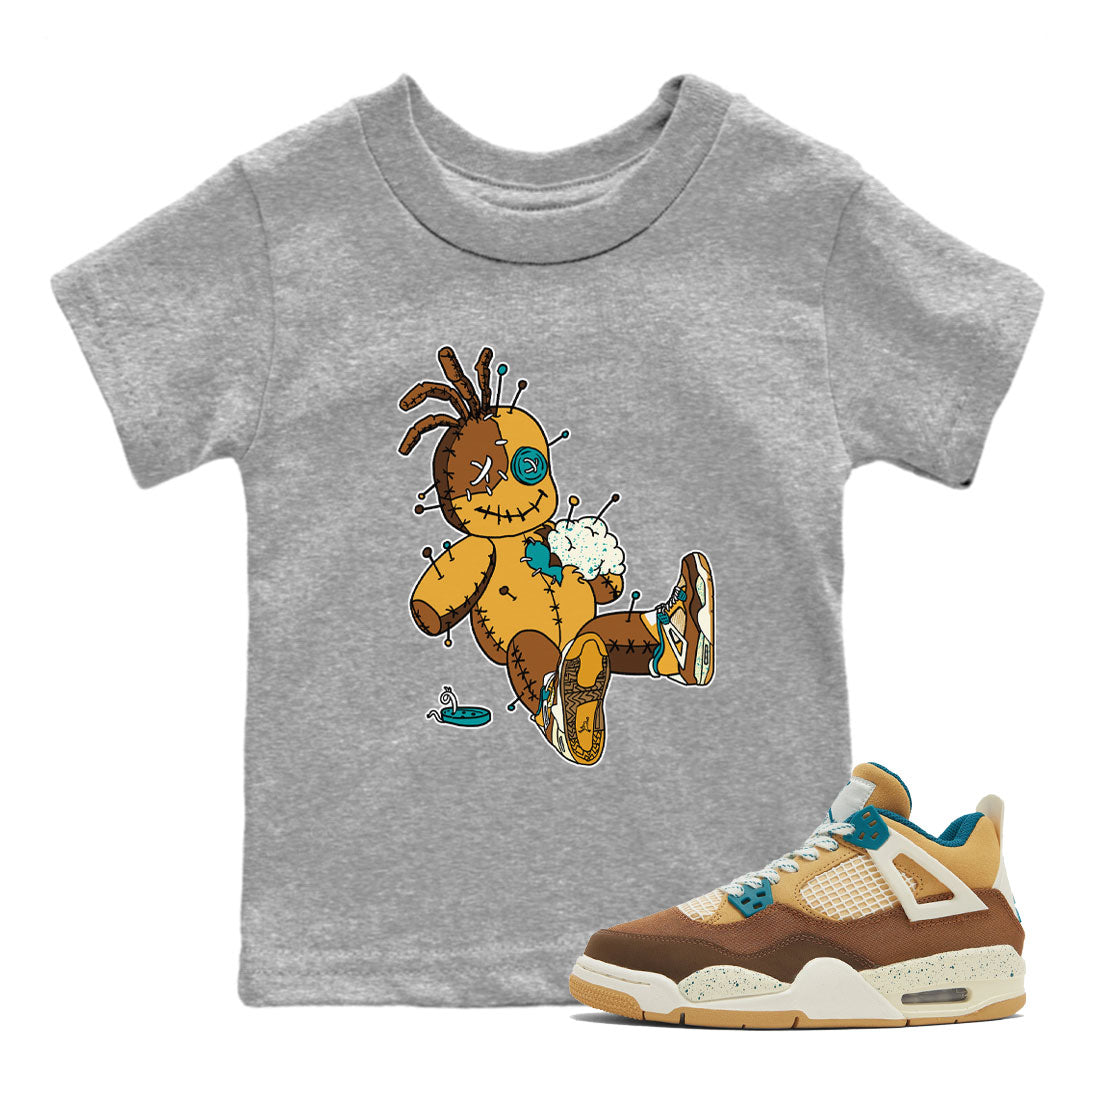 4s Cacao Wow shirt to match jordans Voodoo Doll sneaker tees Air Jordan 4 Cacao Wow SNRT Sneaker Release Tees Baby Toddler Heather Grey 1 T-Shirt